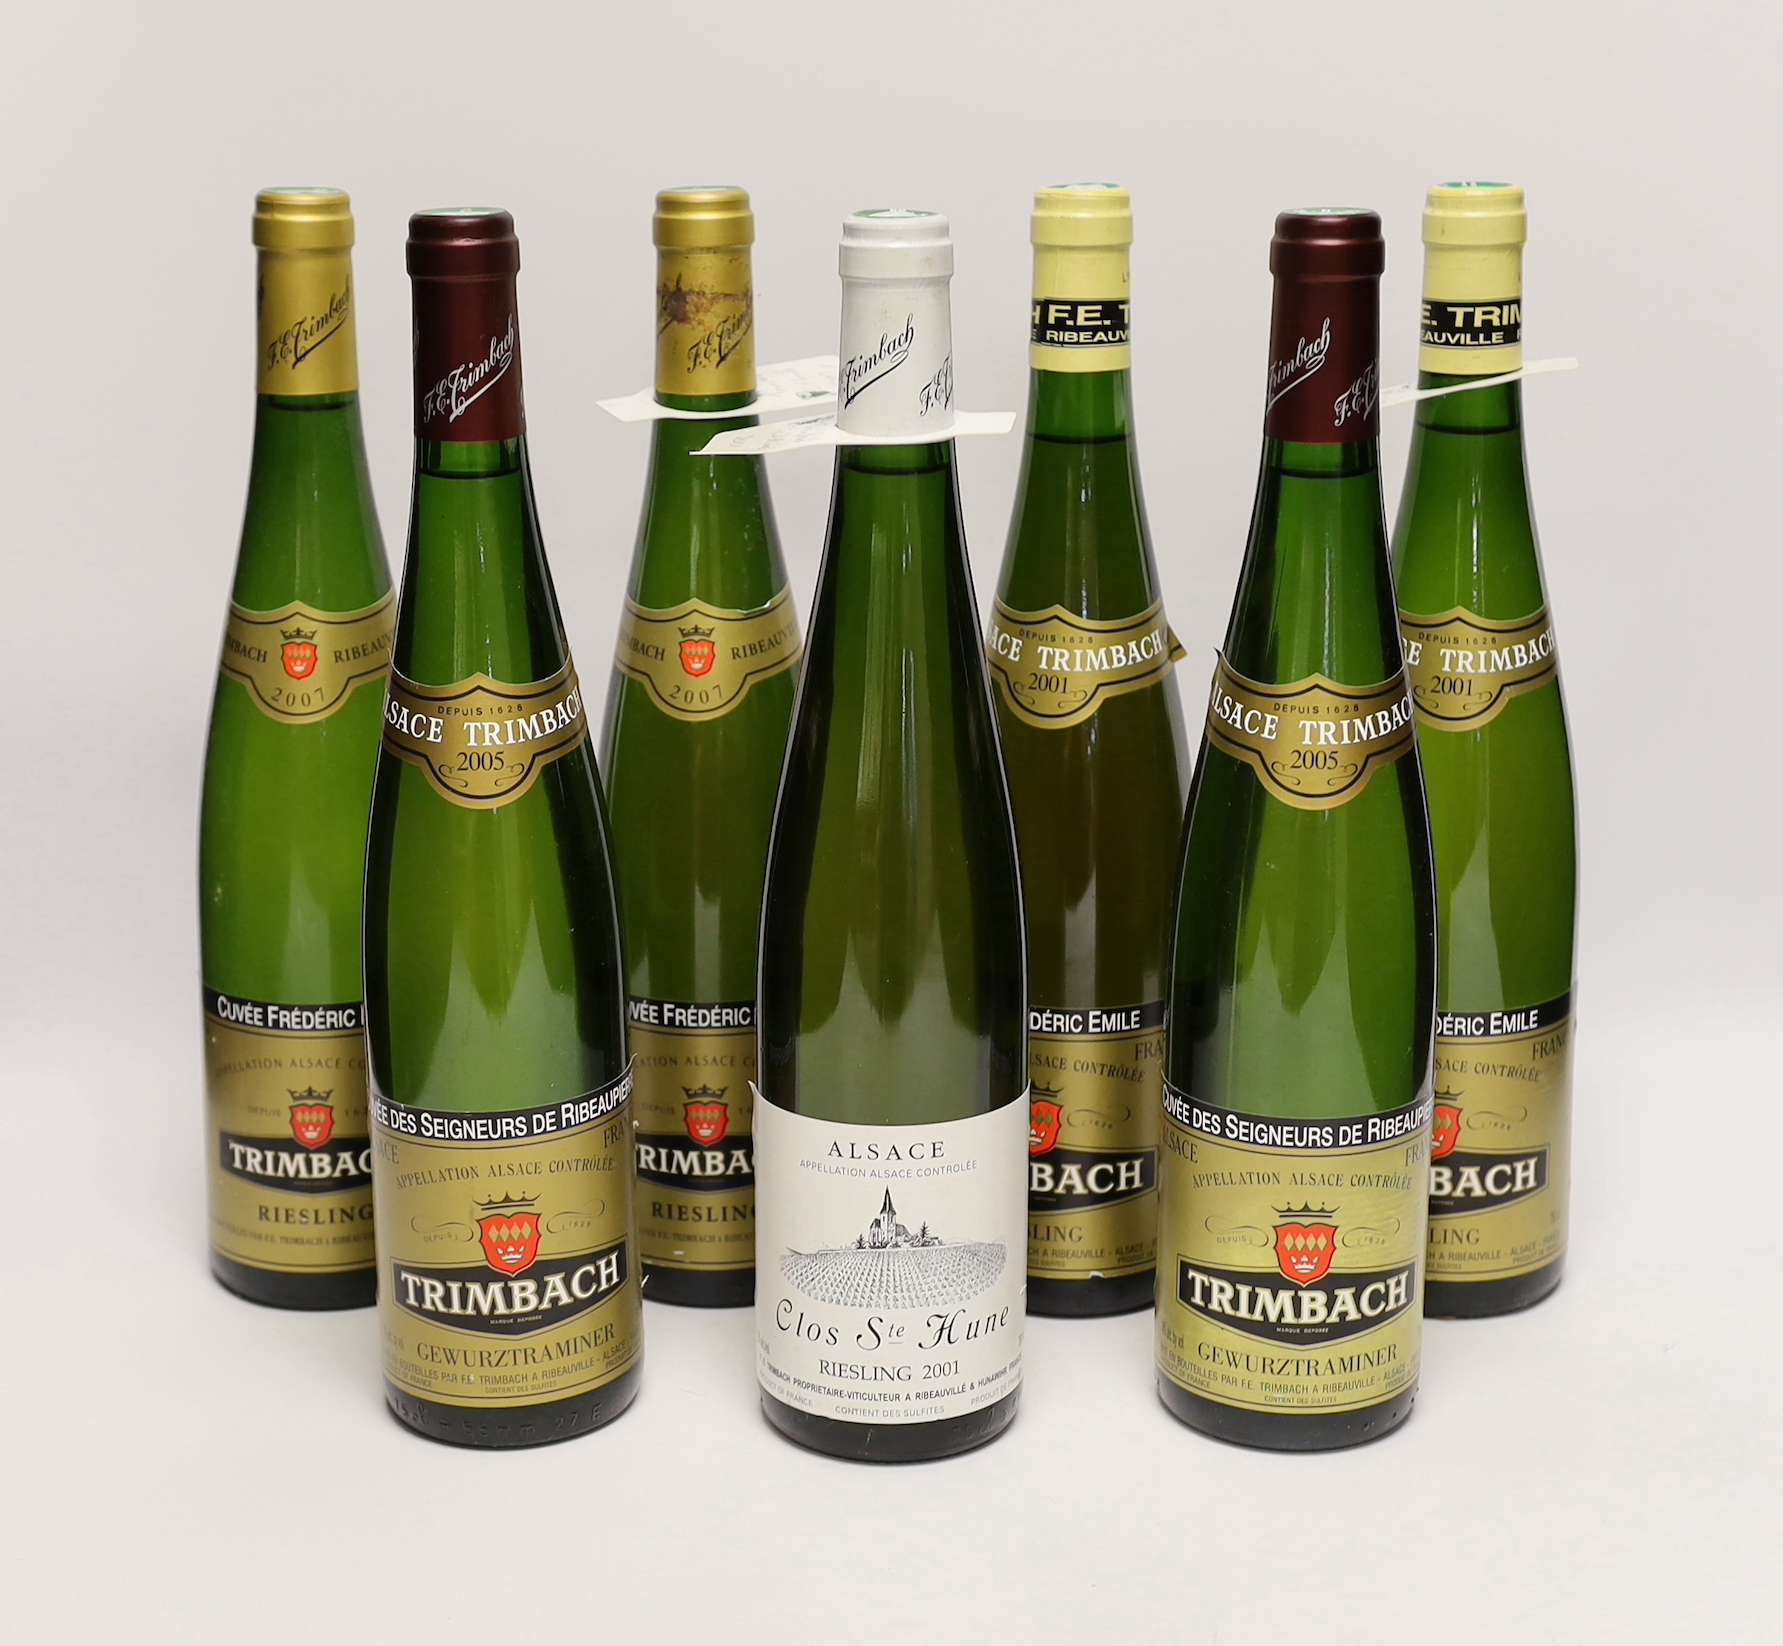 Six bottles of Trimbach Reisling, comprising two 2001, two 2005 and two 2007 together with one bottle of Clos Ste Hune Reisling 2001